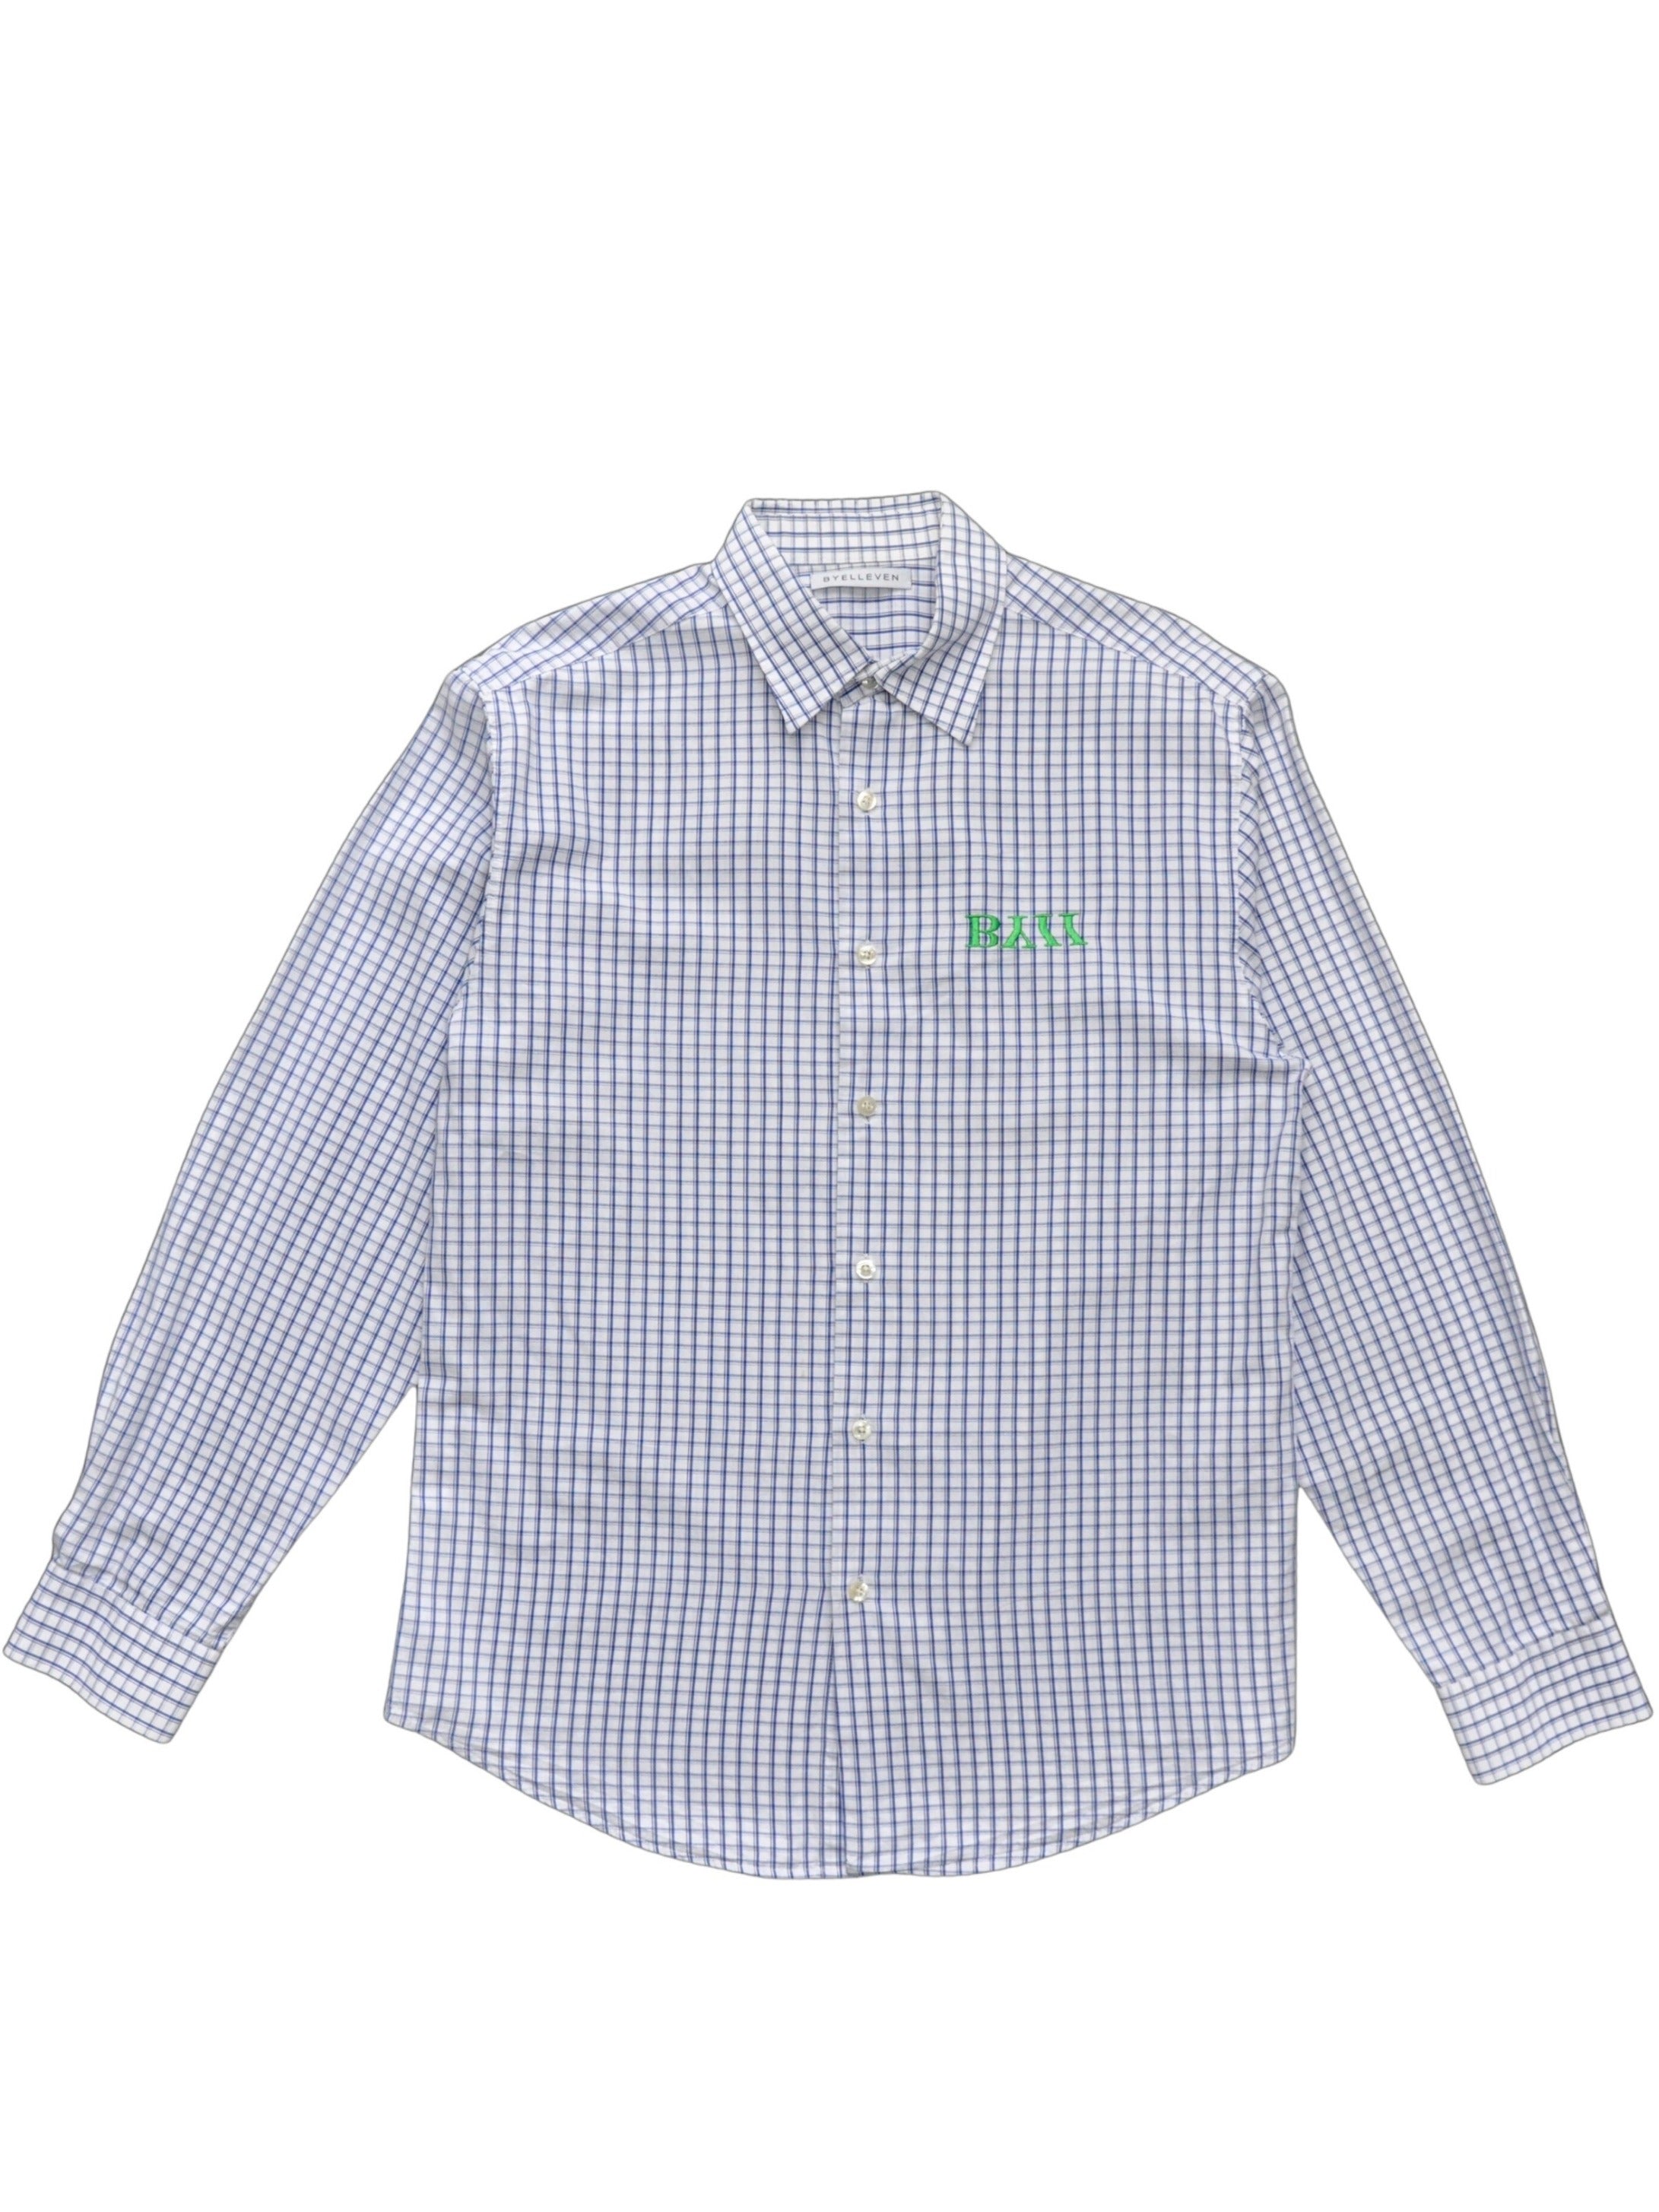 Reimagined Embroidered Logo Cotton Shirt - Blue Grid Check